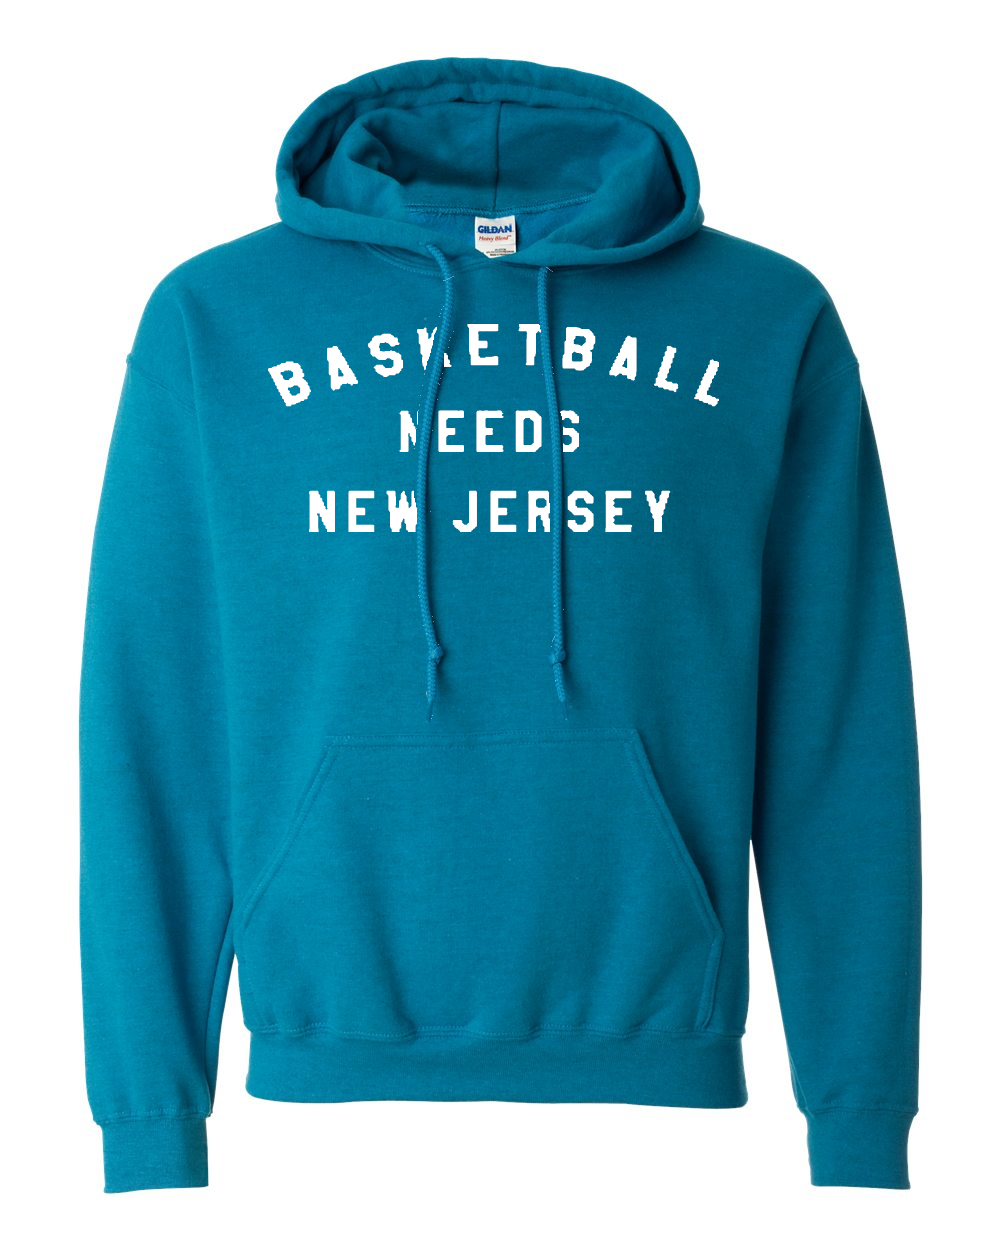 jersey and hoodie